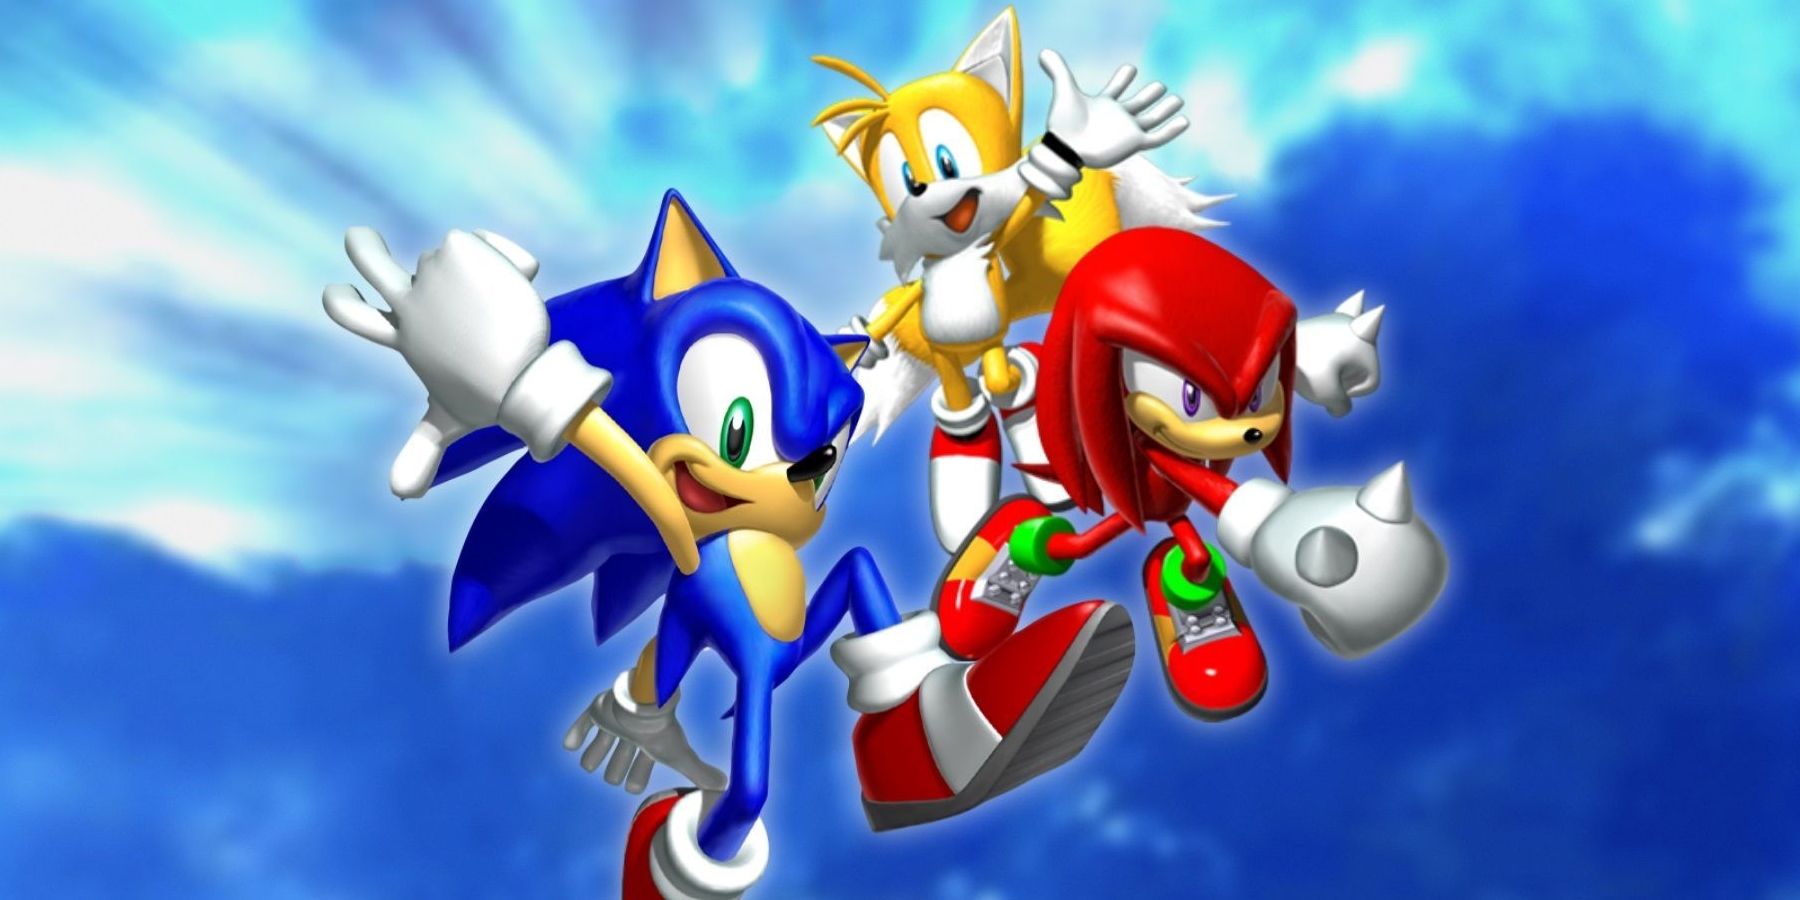 download-game-sonic-heroes-for-android-limfadad